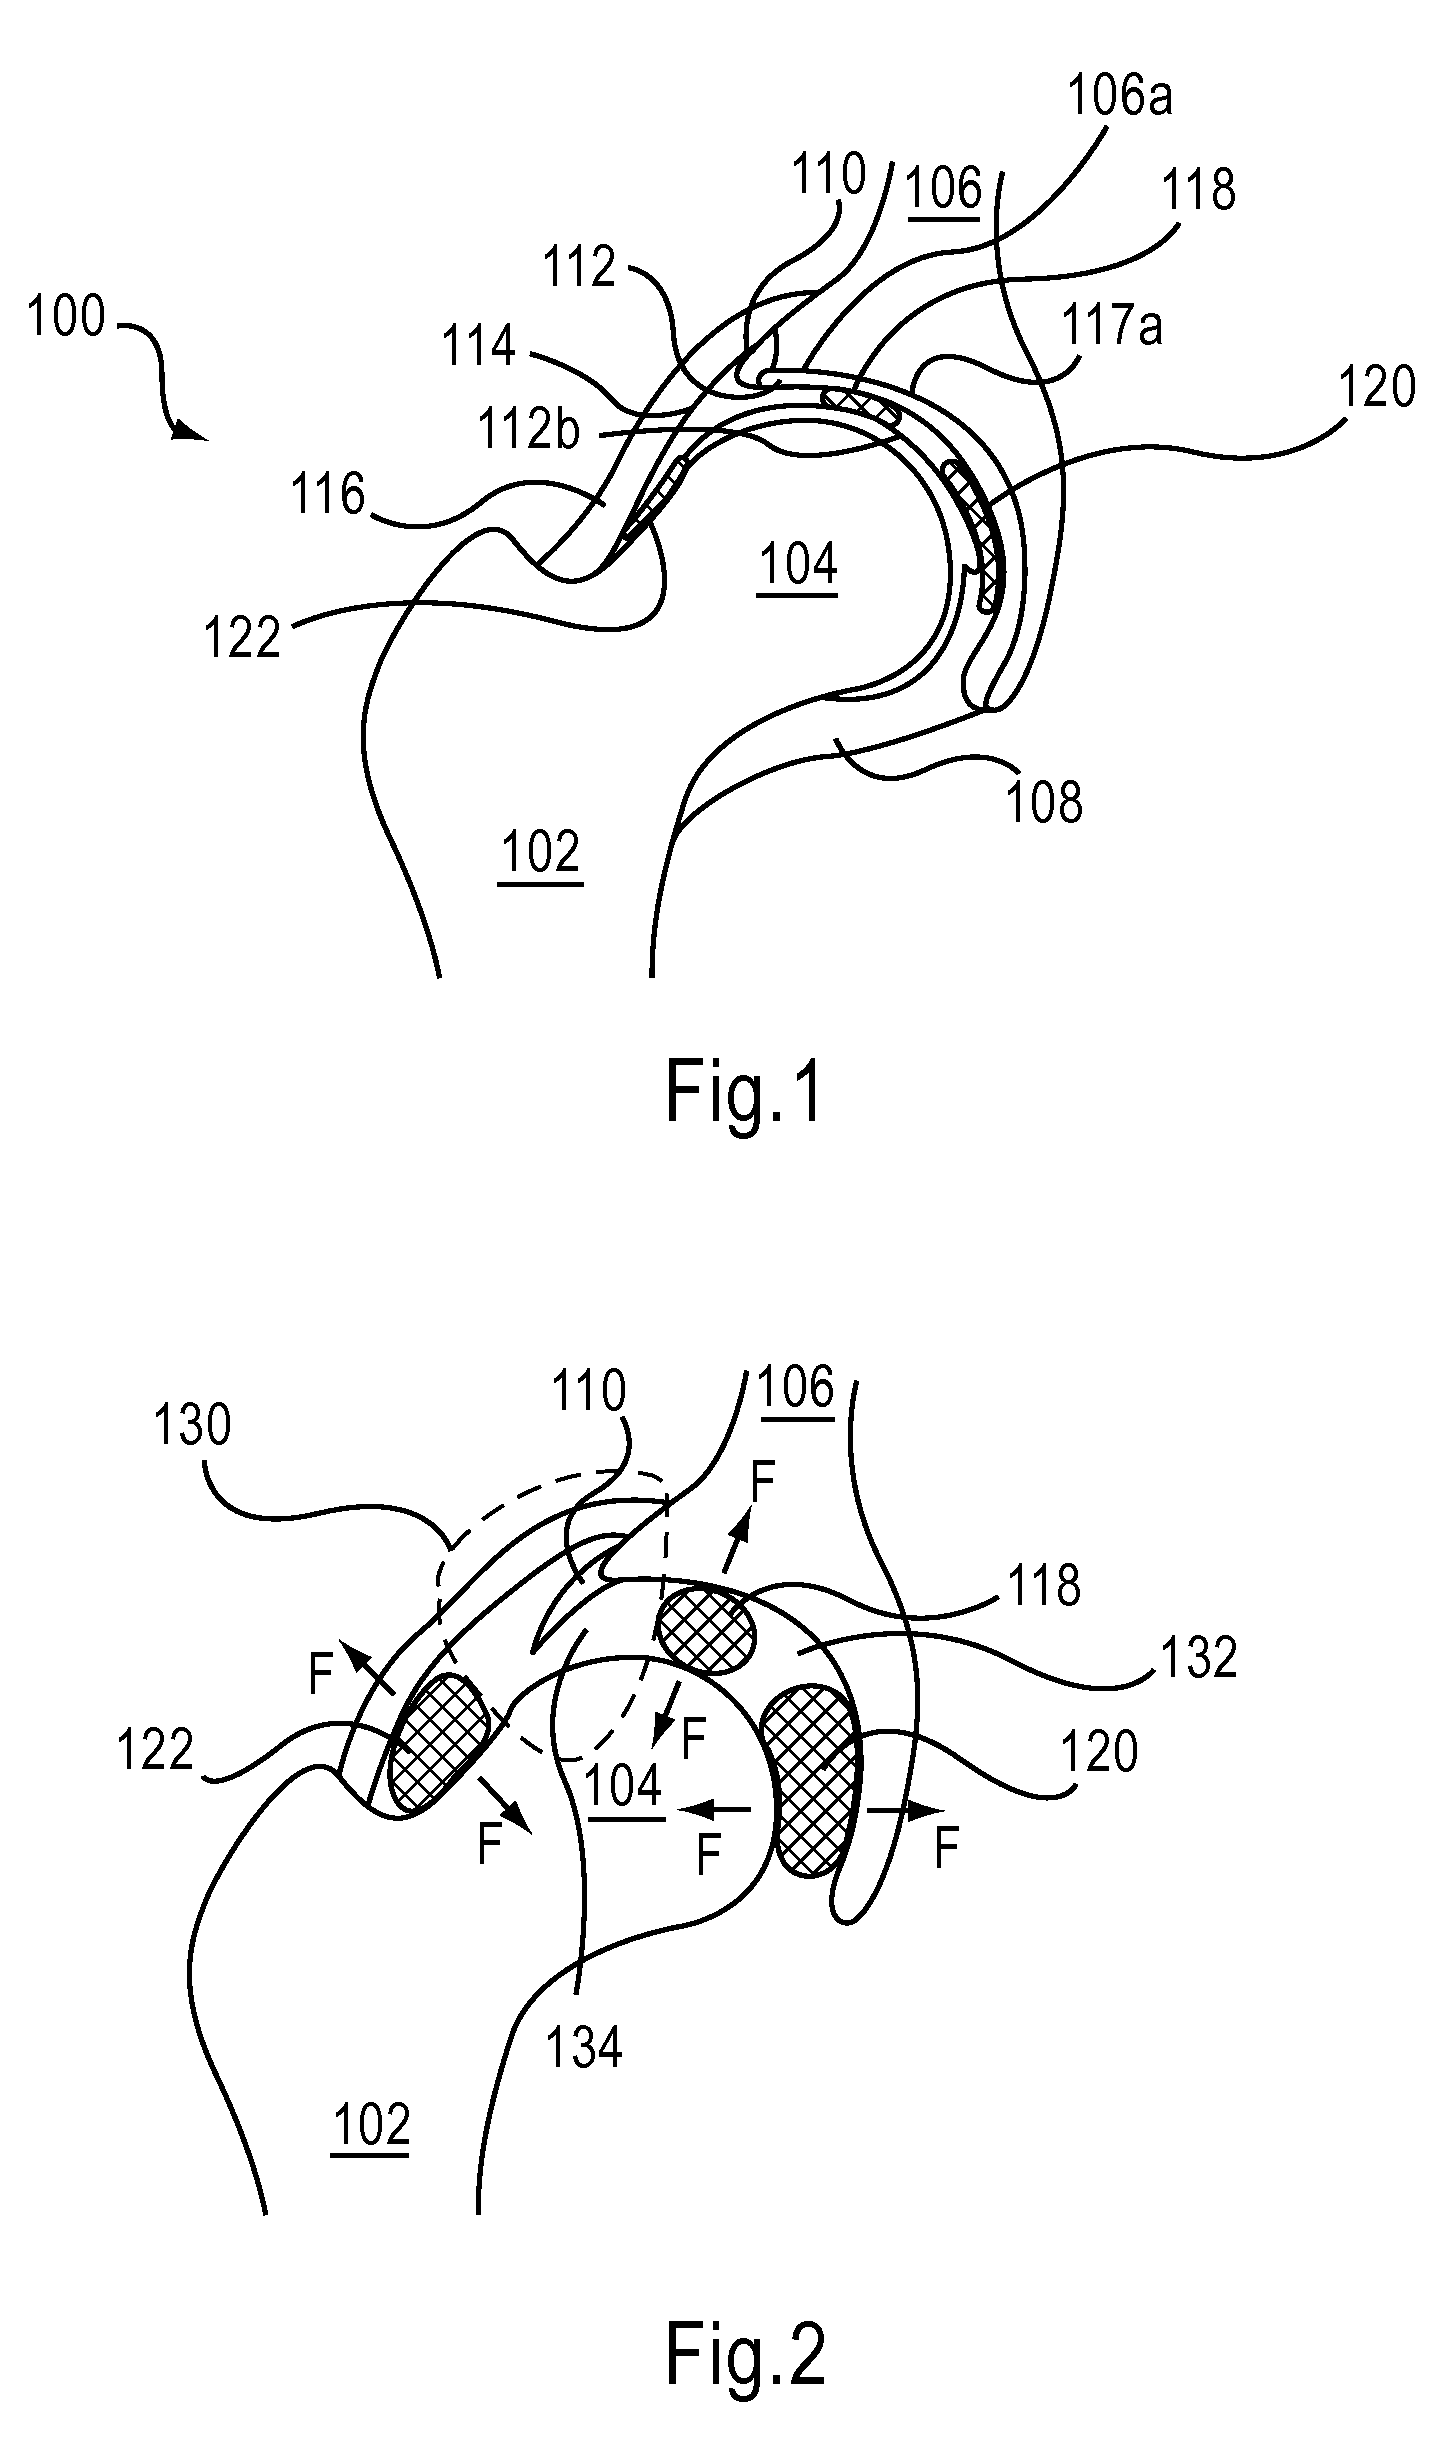 Device and Method for Hip Distention and Access